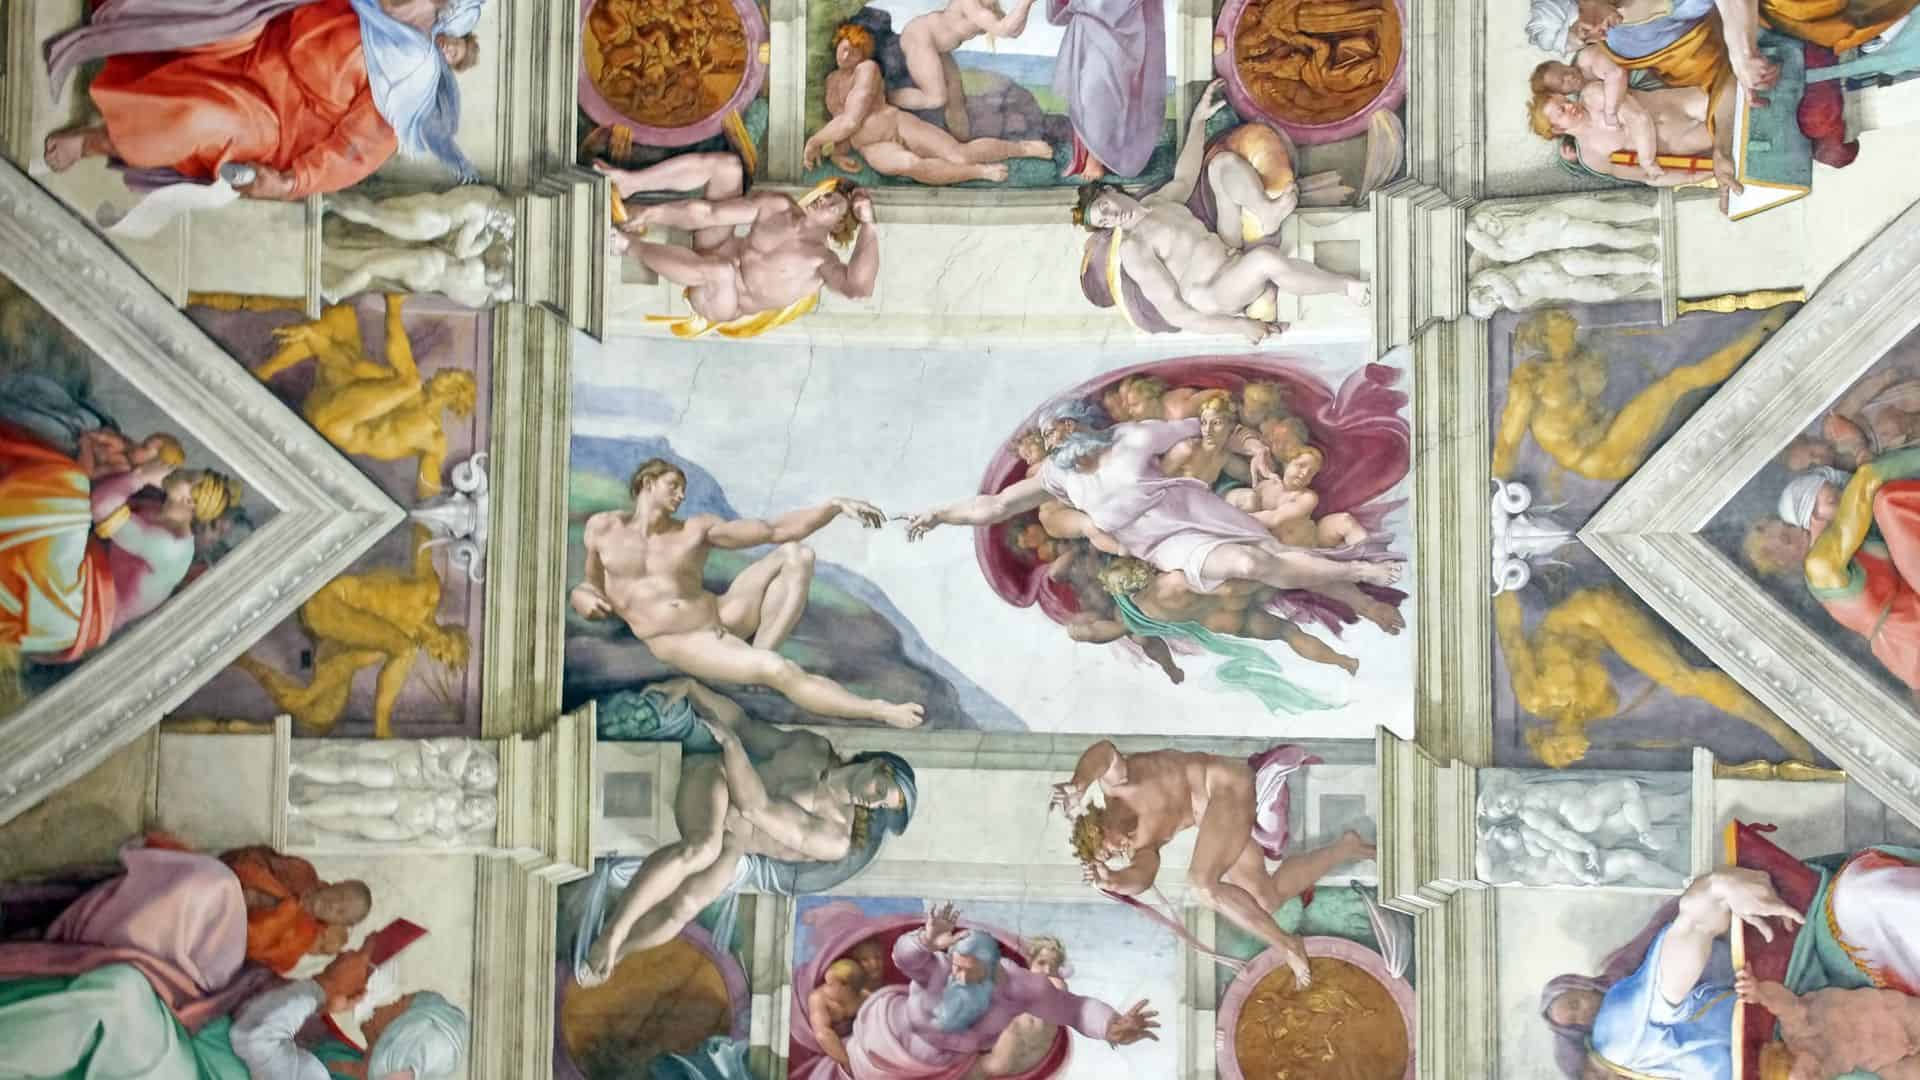 Michelangelo's masterpiece "The Creation of Adam" in the Sistine Chapel in vatican City, Rome.